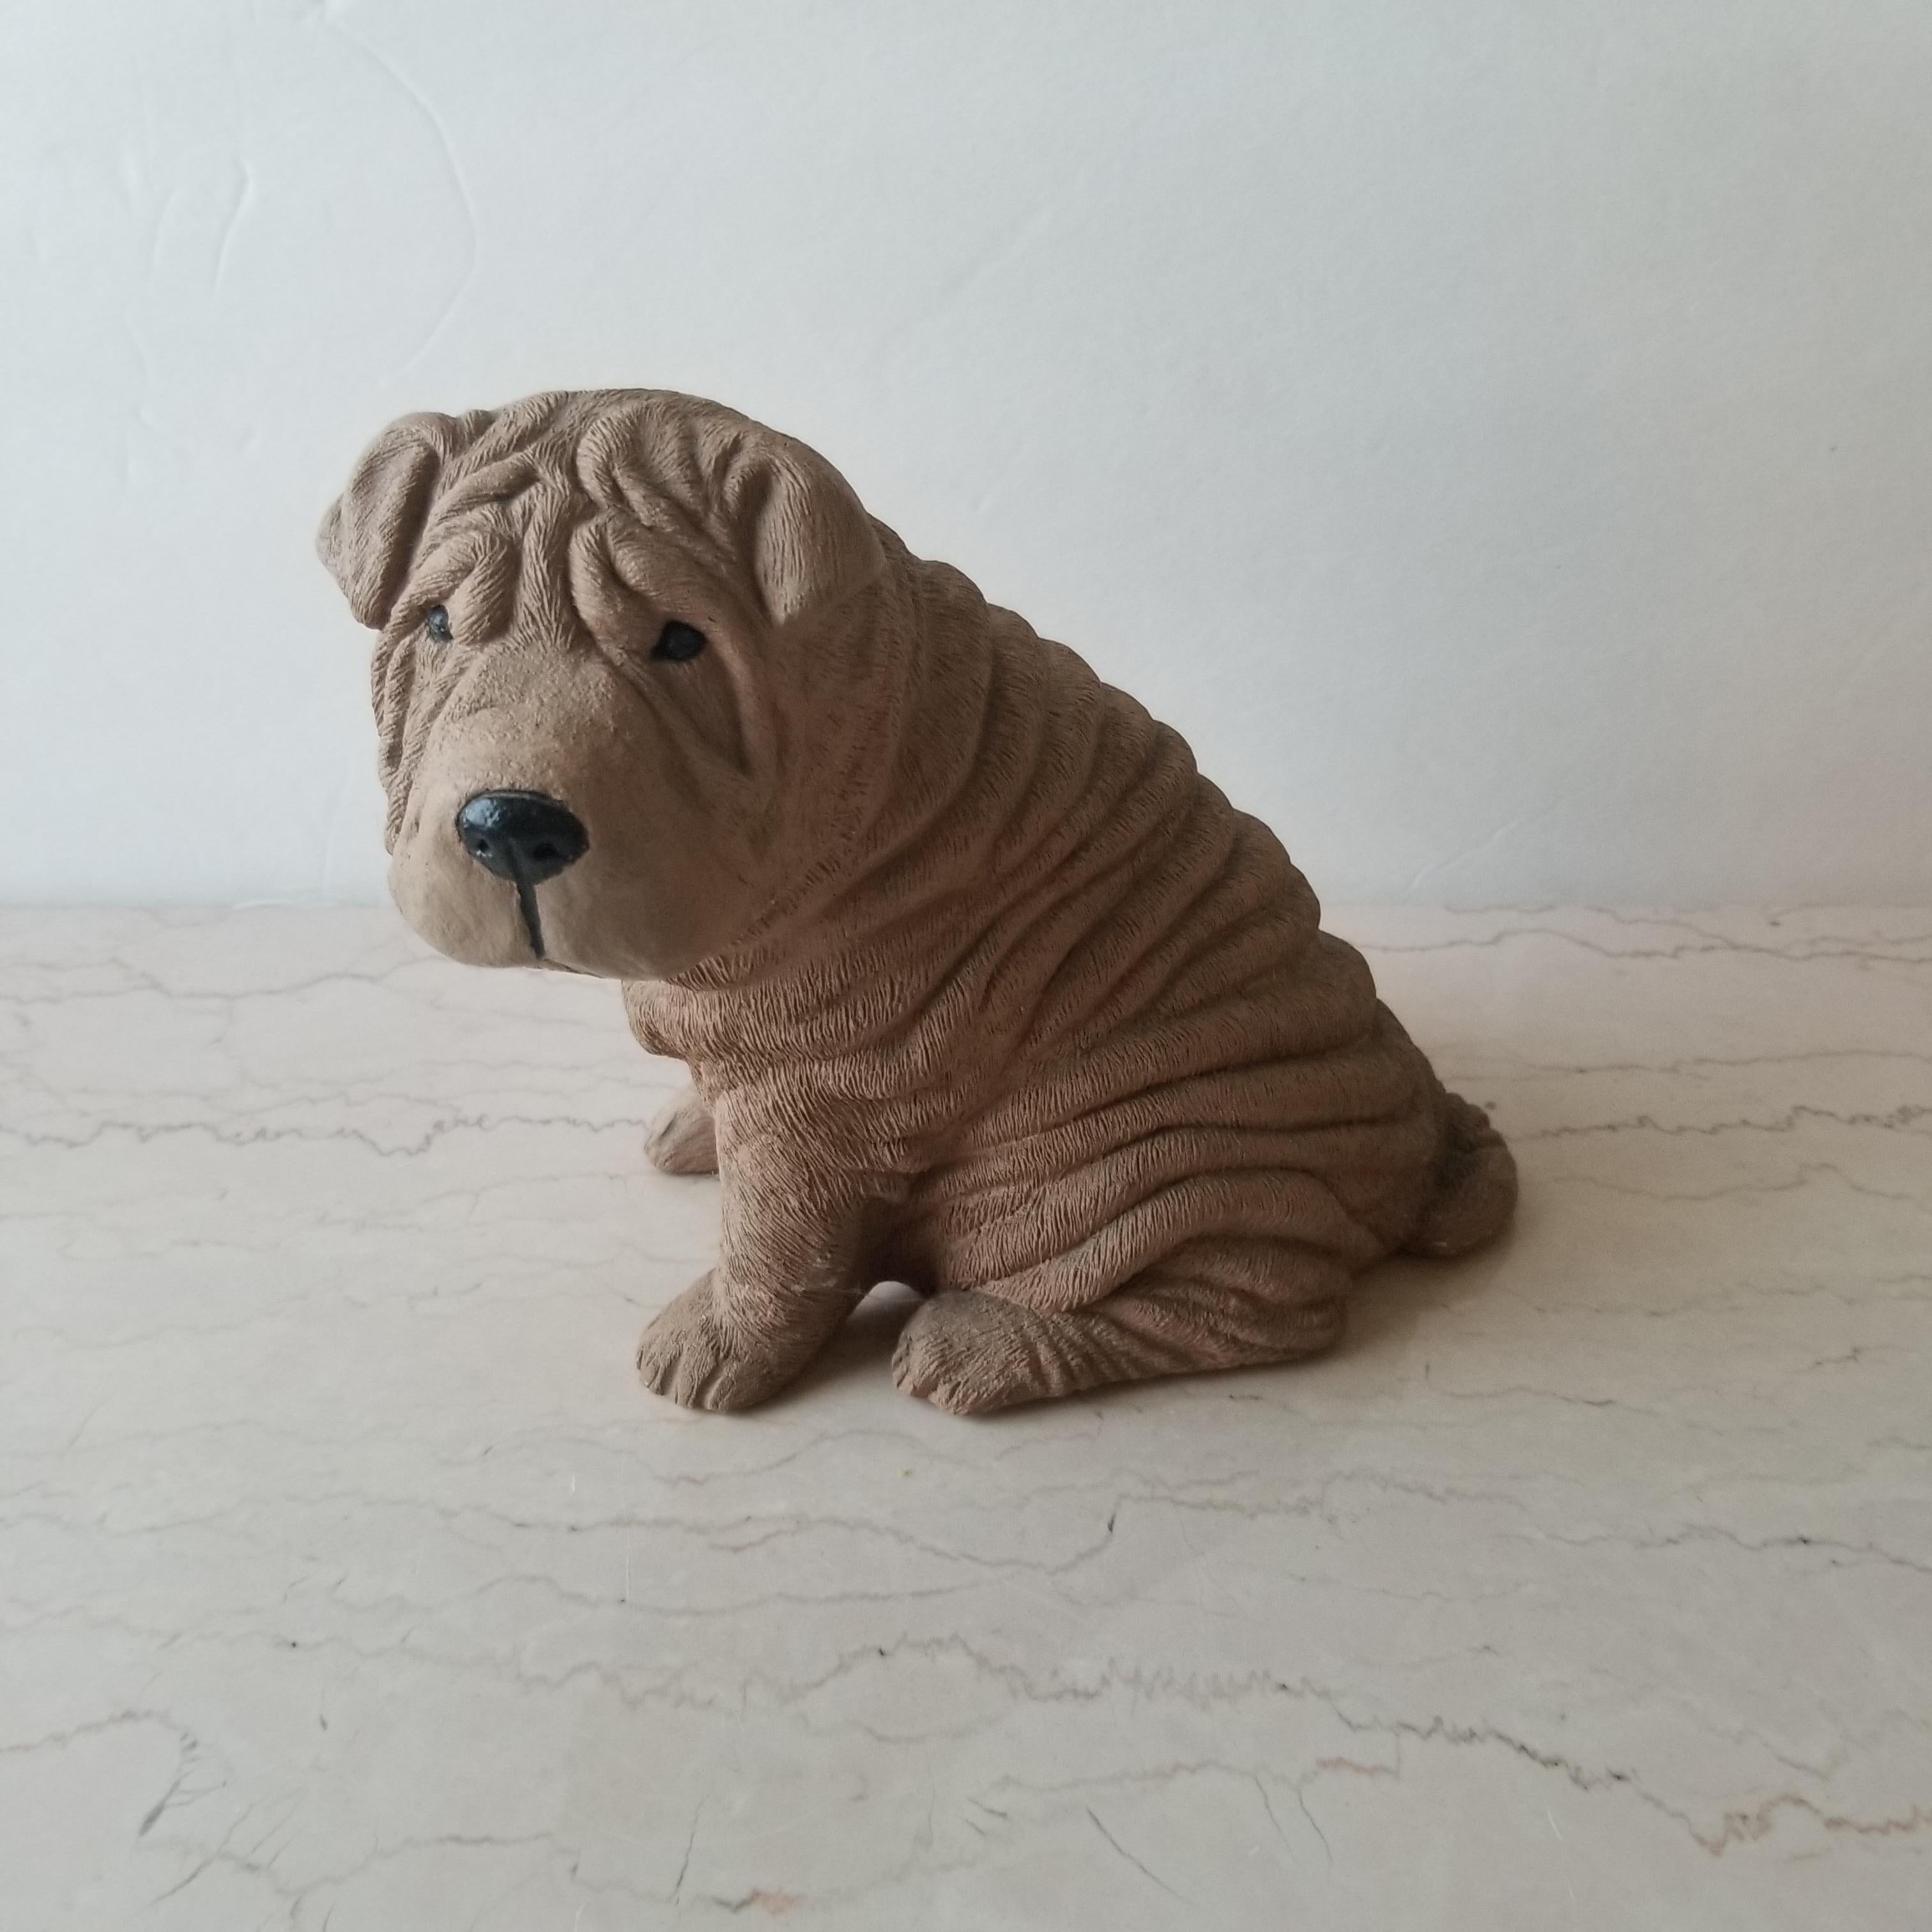 Too cute Shar Pei Dog Table Sculpture. 
Hand cast in clay like material hand painted.
Vintage piece 1986. 
Signed by artist Sandra Brue for Sandicast San Diego CA. 
9d x 6w x 6.5t inches
Original preowned unrestored vintage presentation and